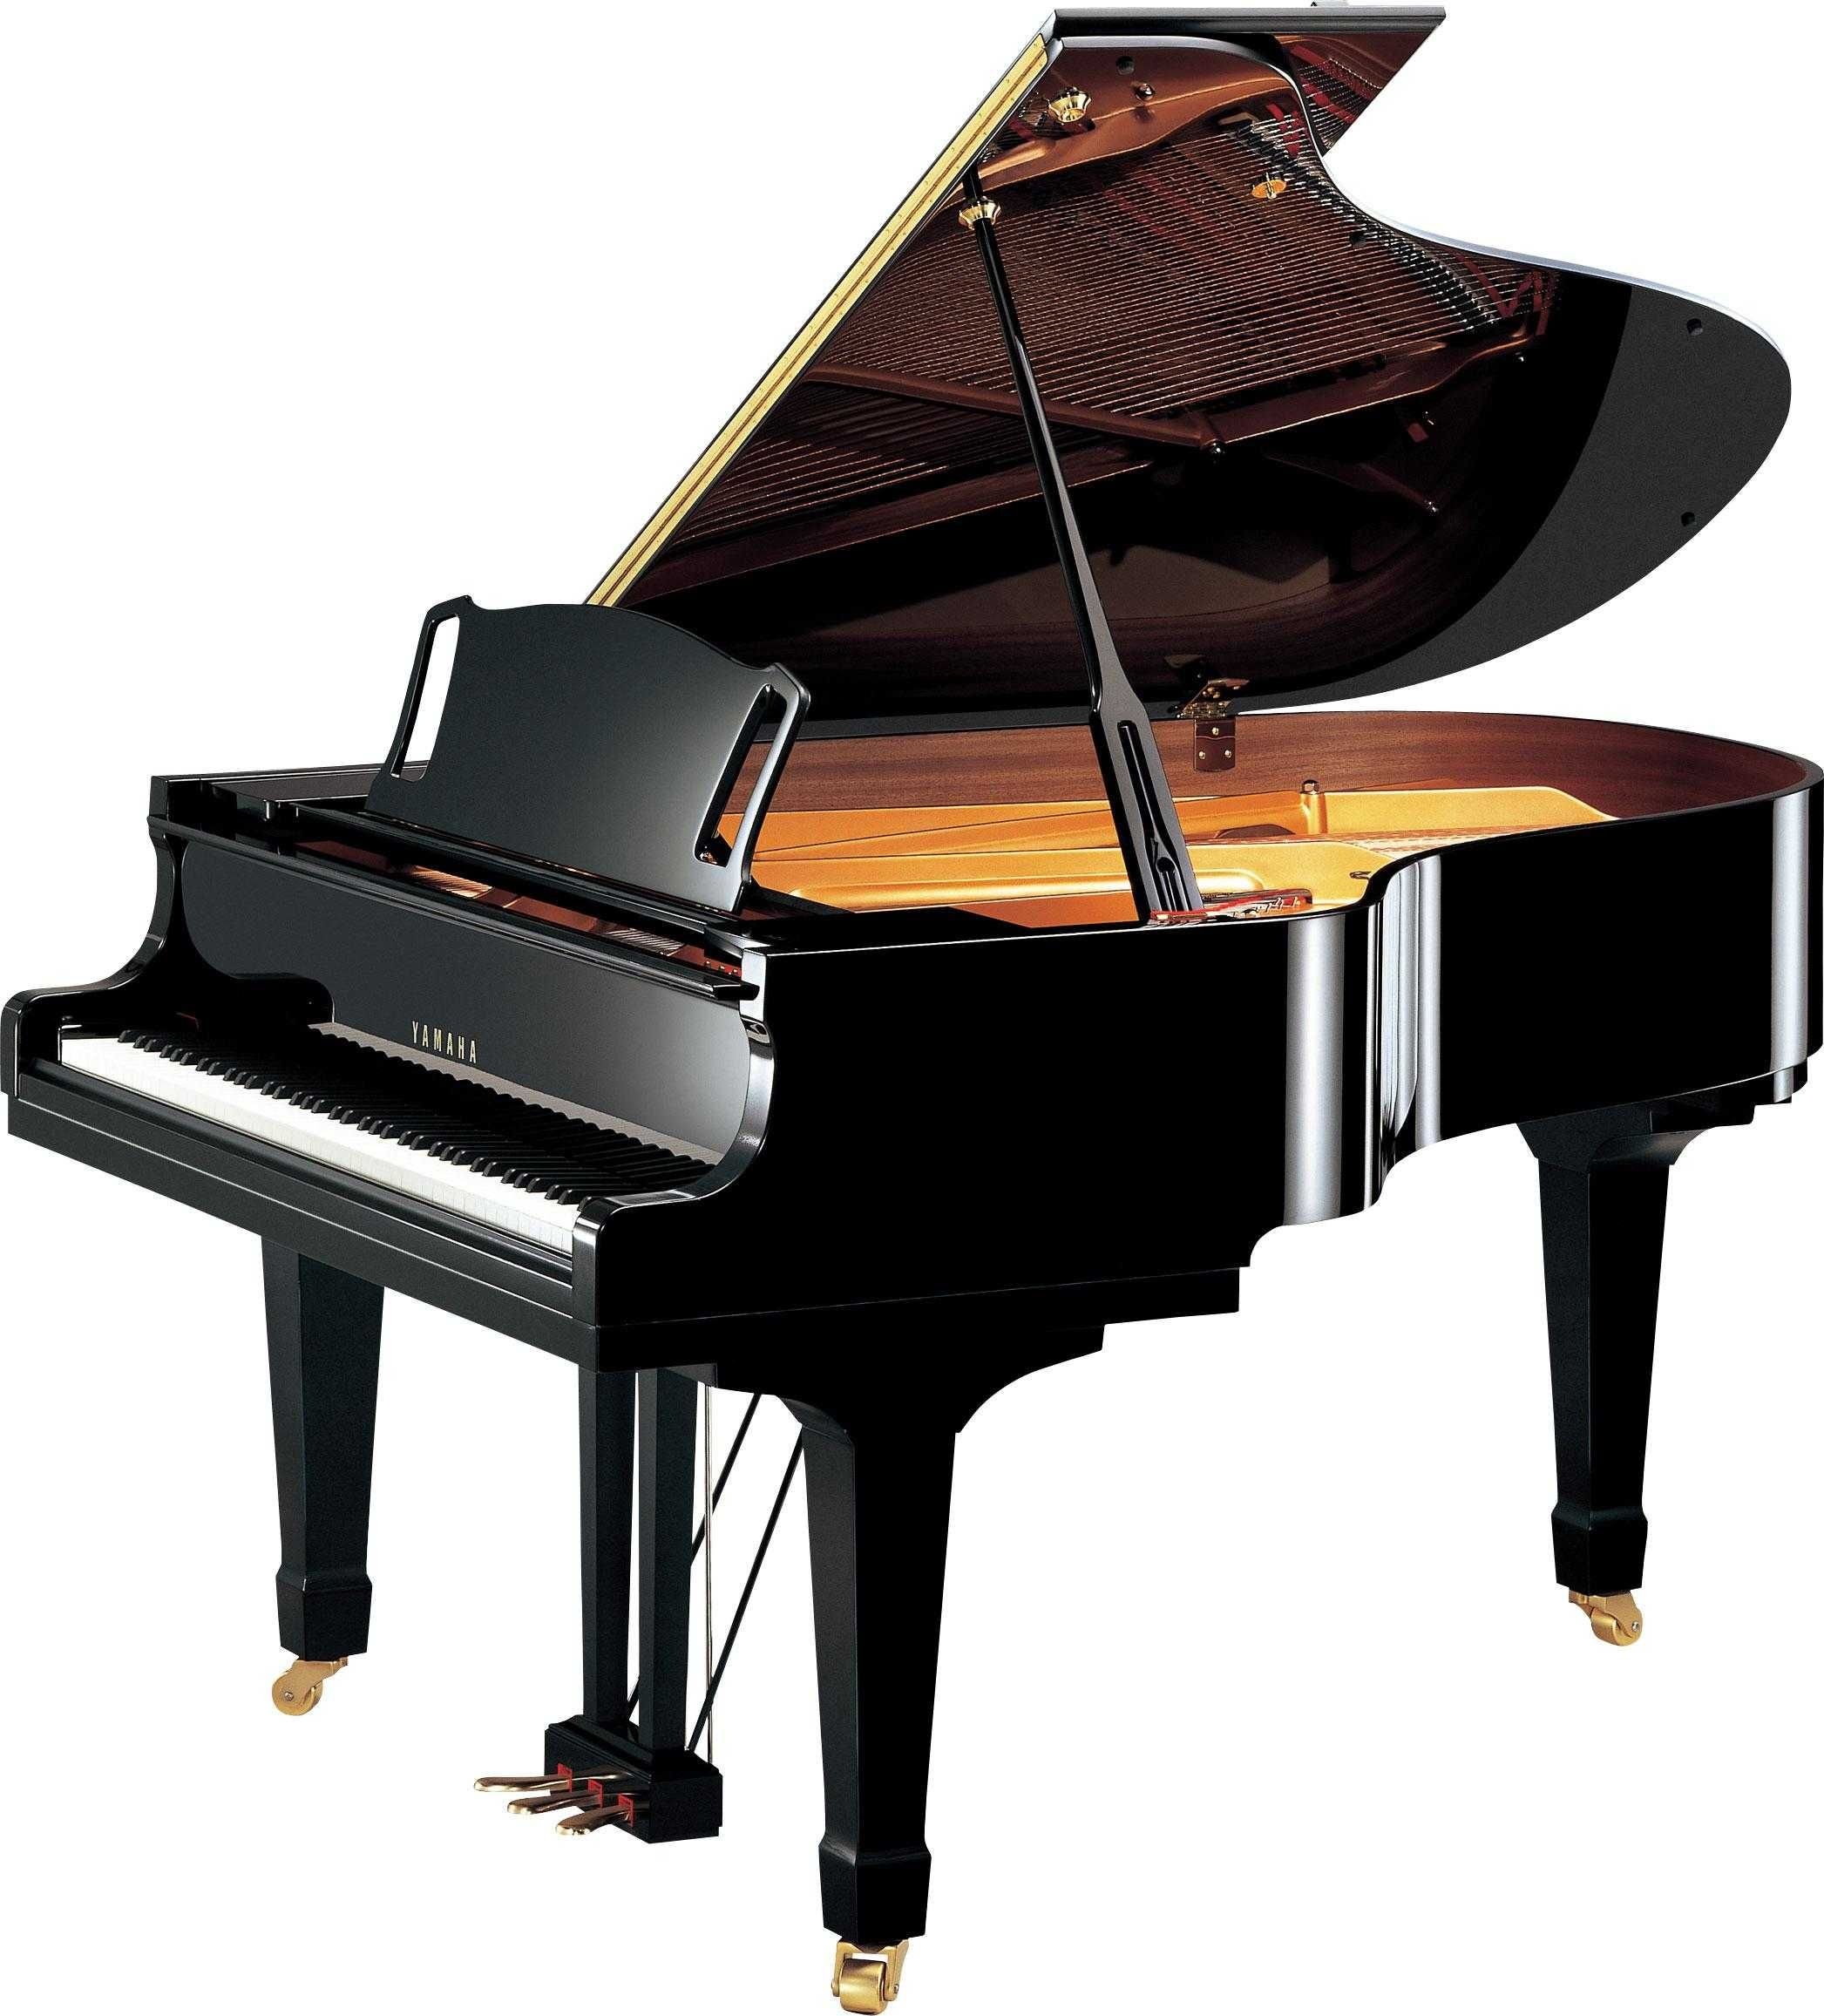 Fortepiano: Yamaha, Modern Types Of Classical Instruments, Vibrational Modes Of The String. 2100x2320 HD Background.